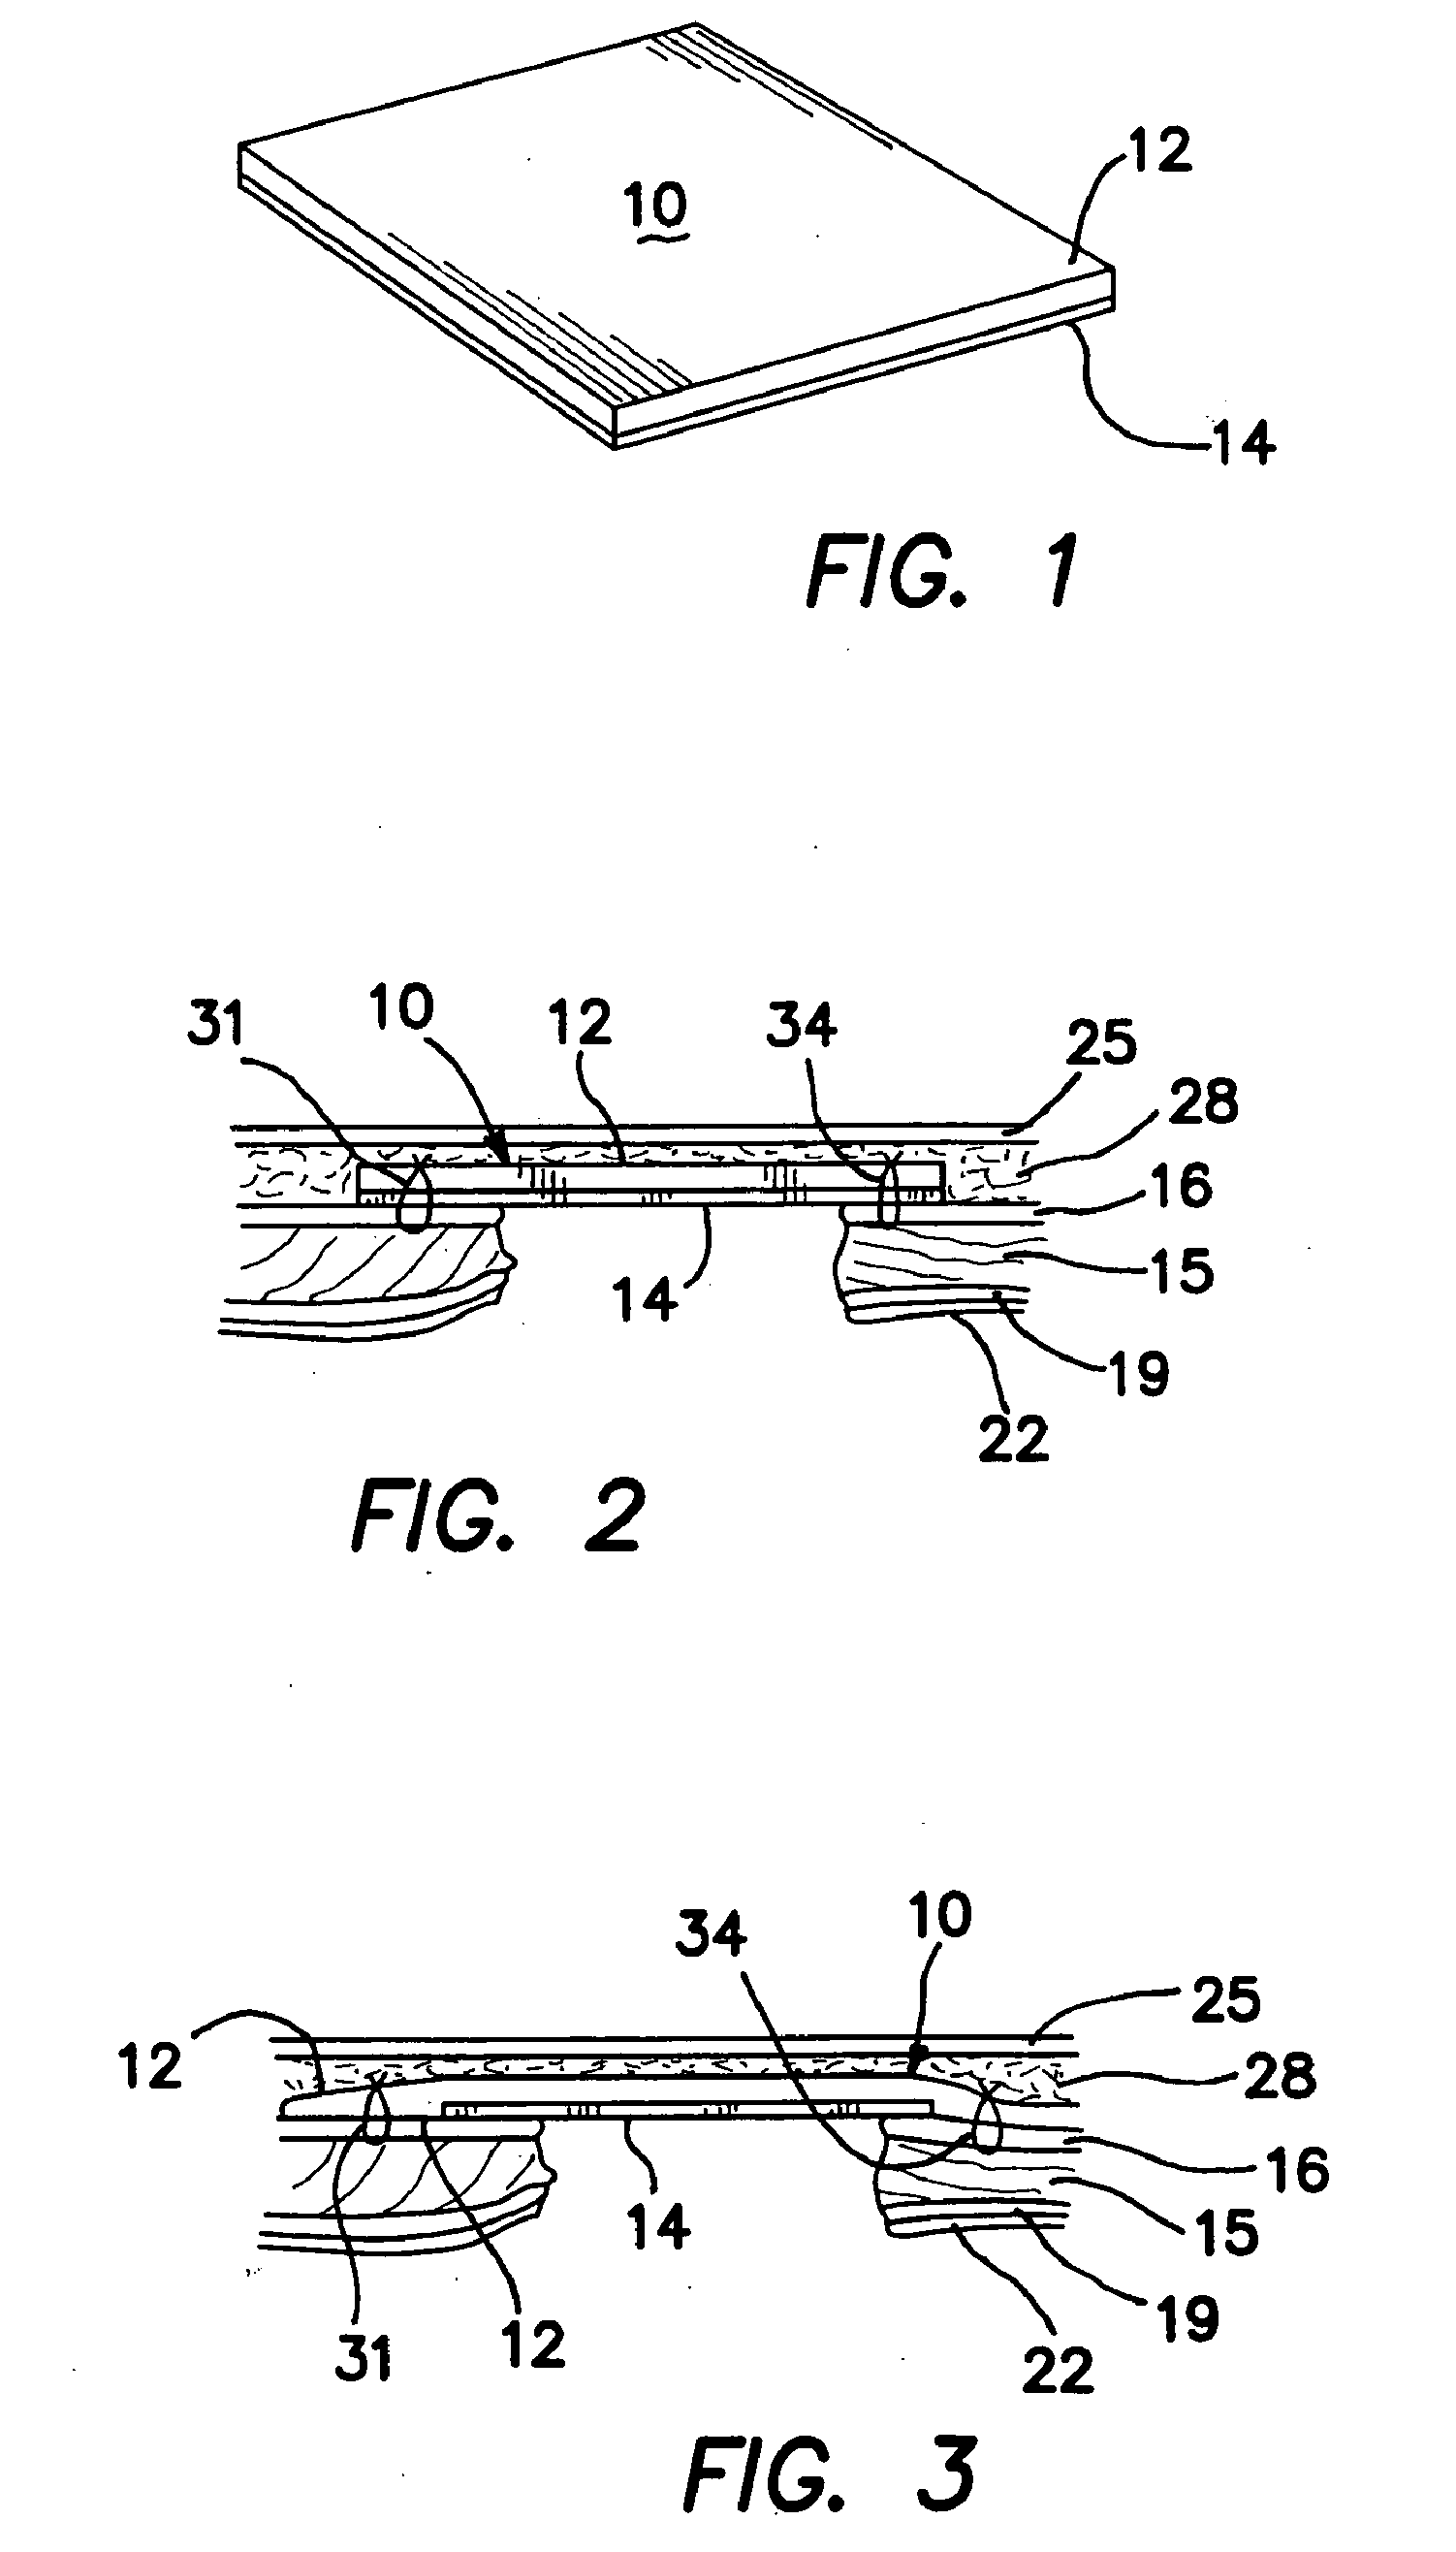 Surgical prosthesis having biodegradable and nonbiodegradable regions